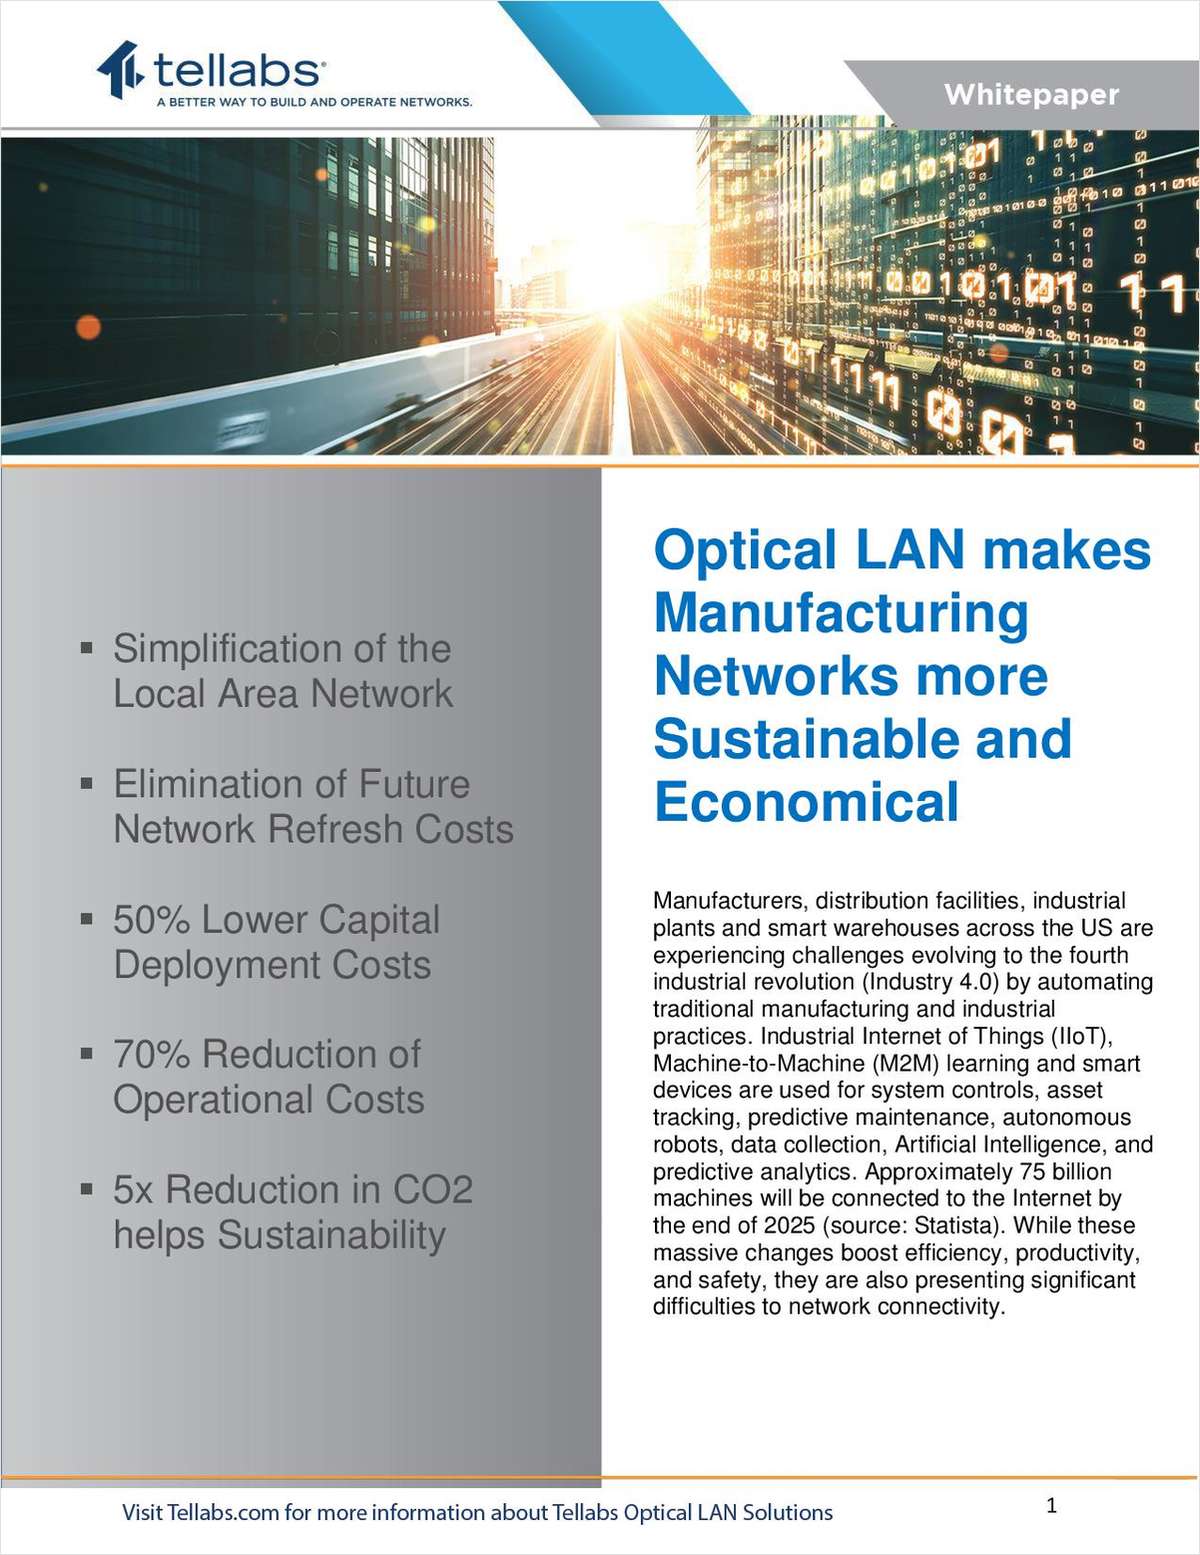 How Optical LAN makes Manufacturing Networks Sustainable and Economical